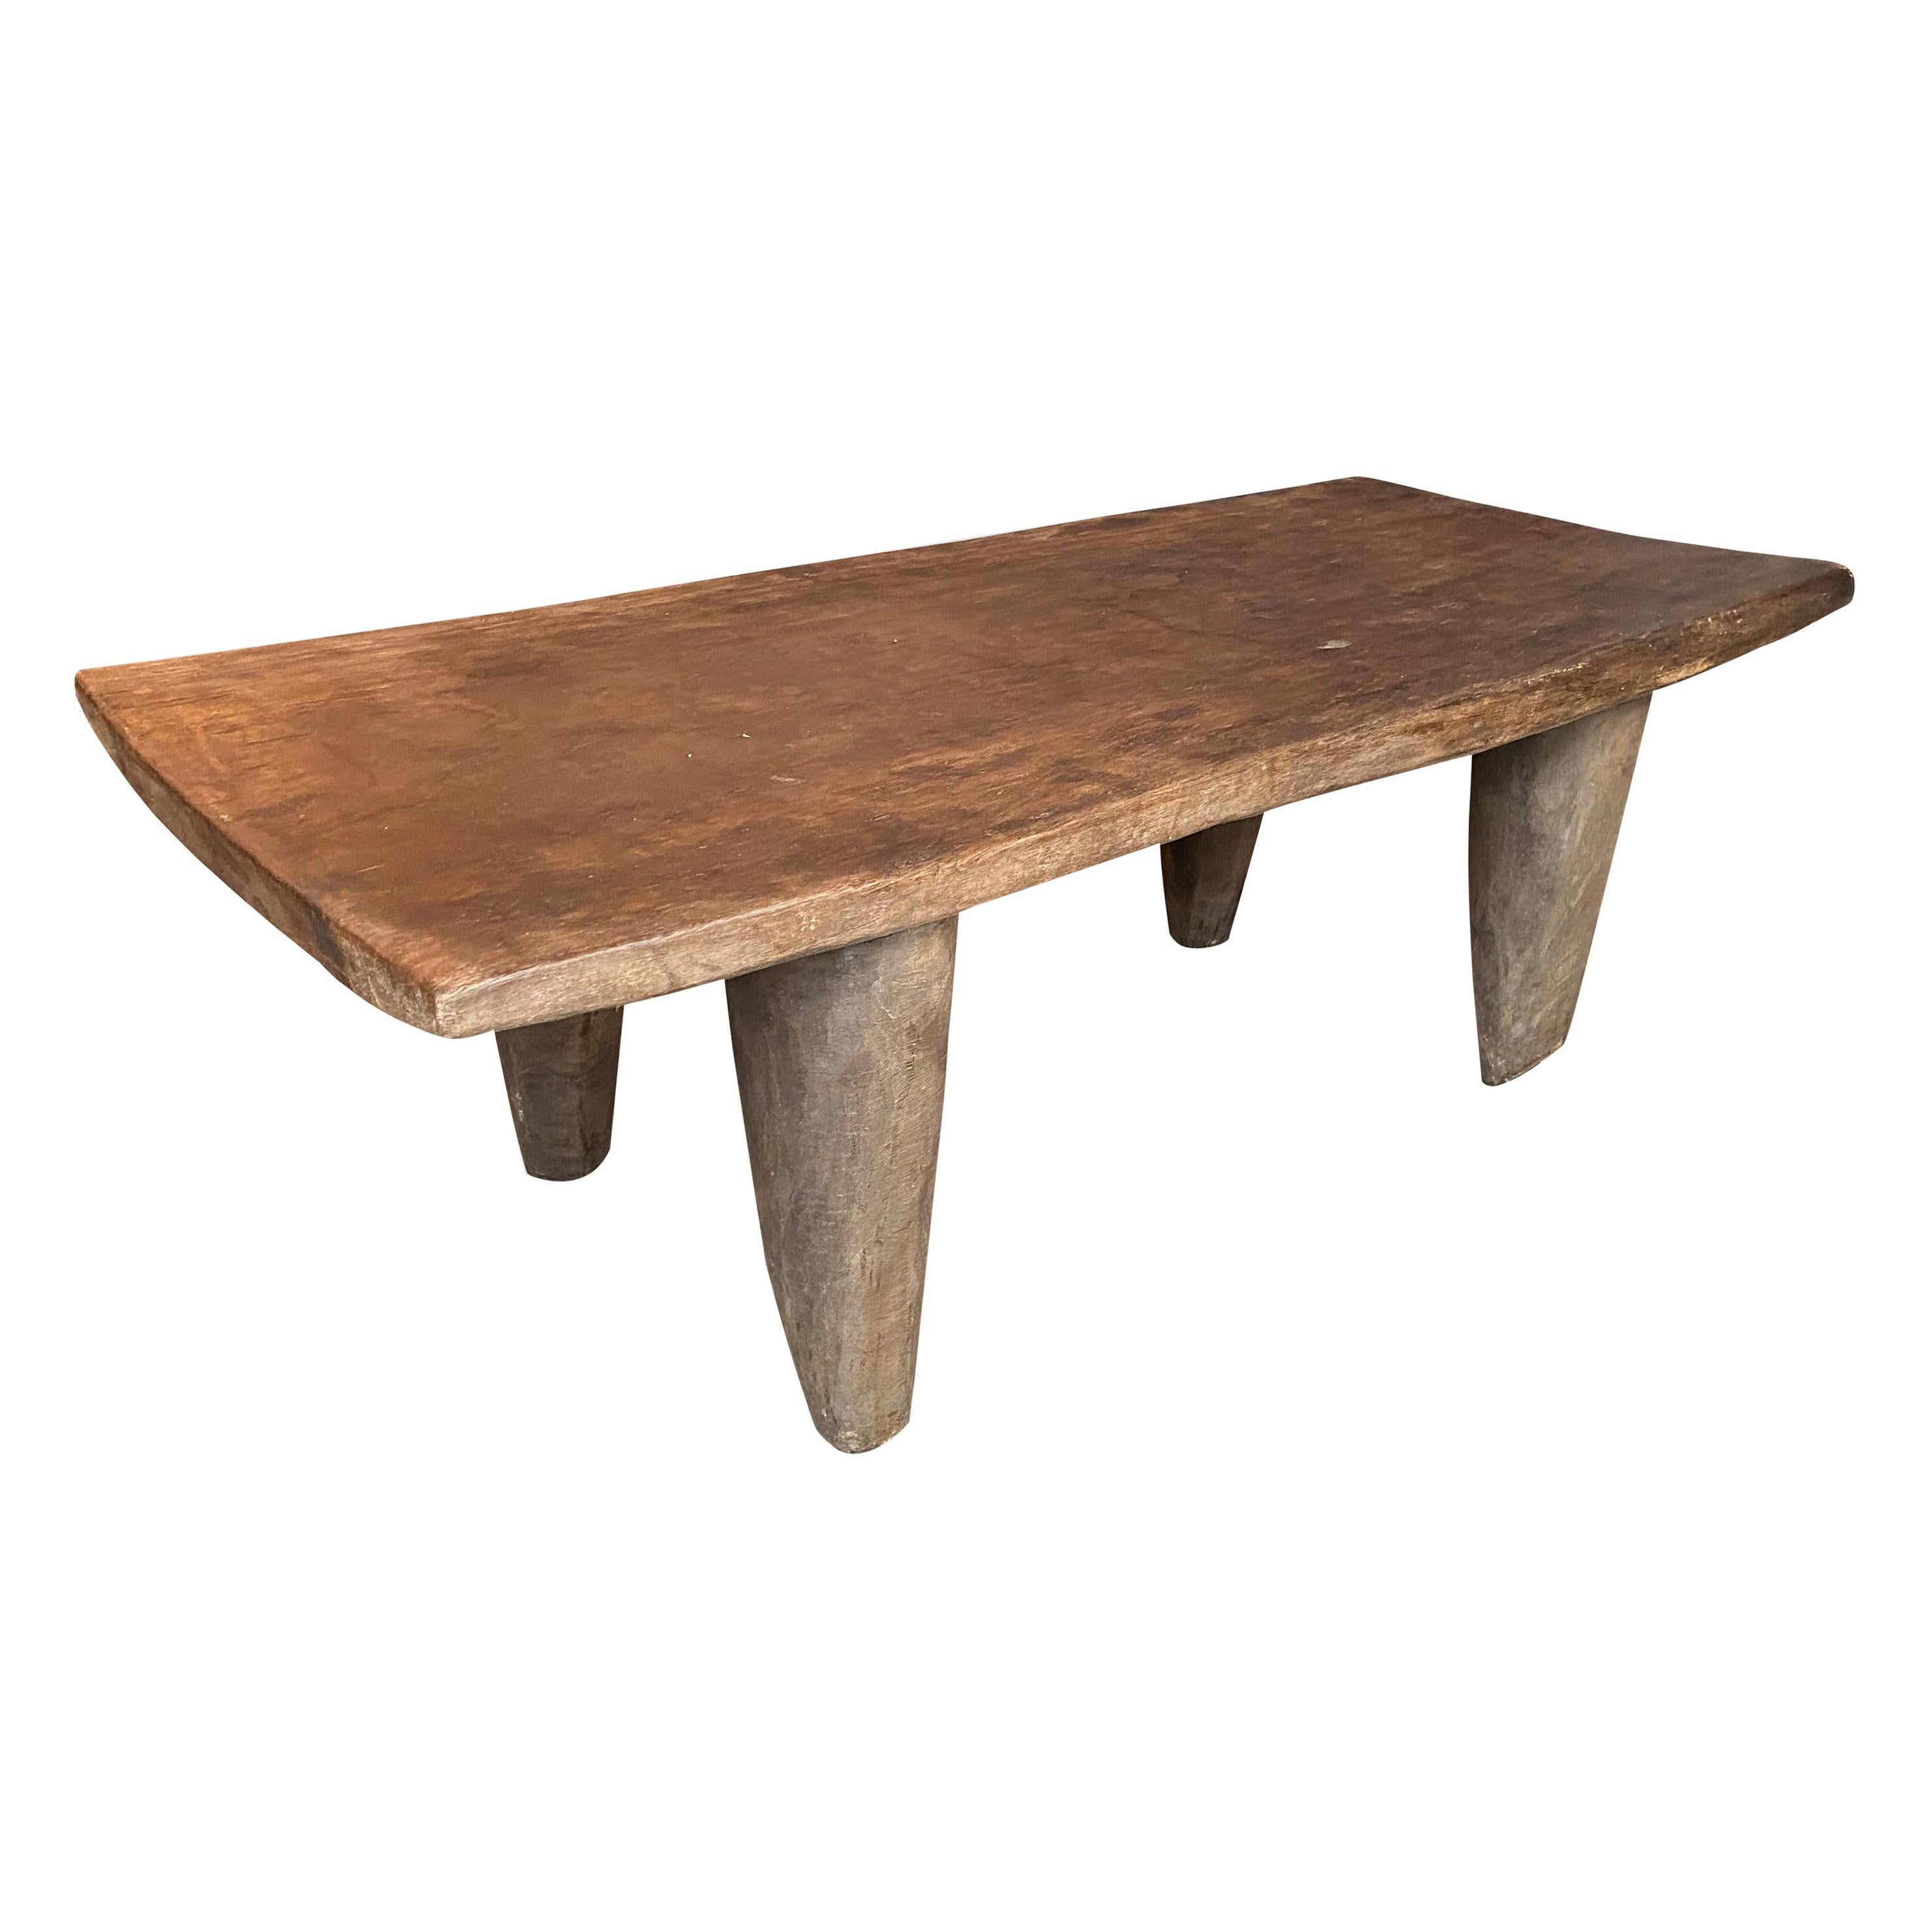 Iroko Wood Antique African Coffee Table or Bench